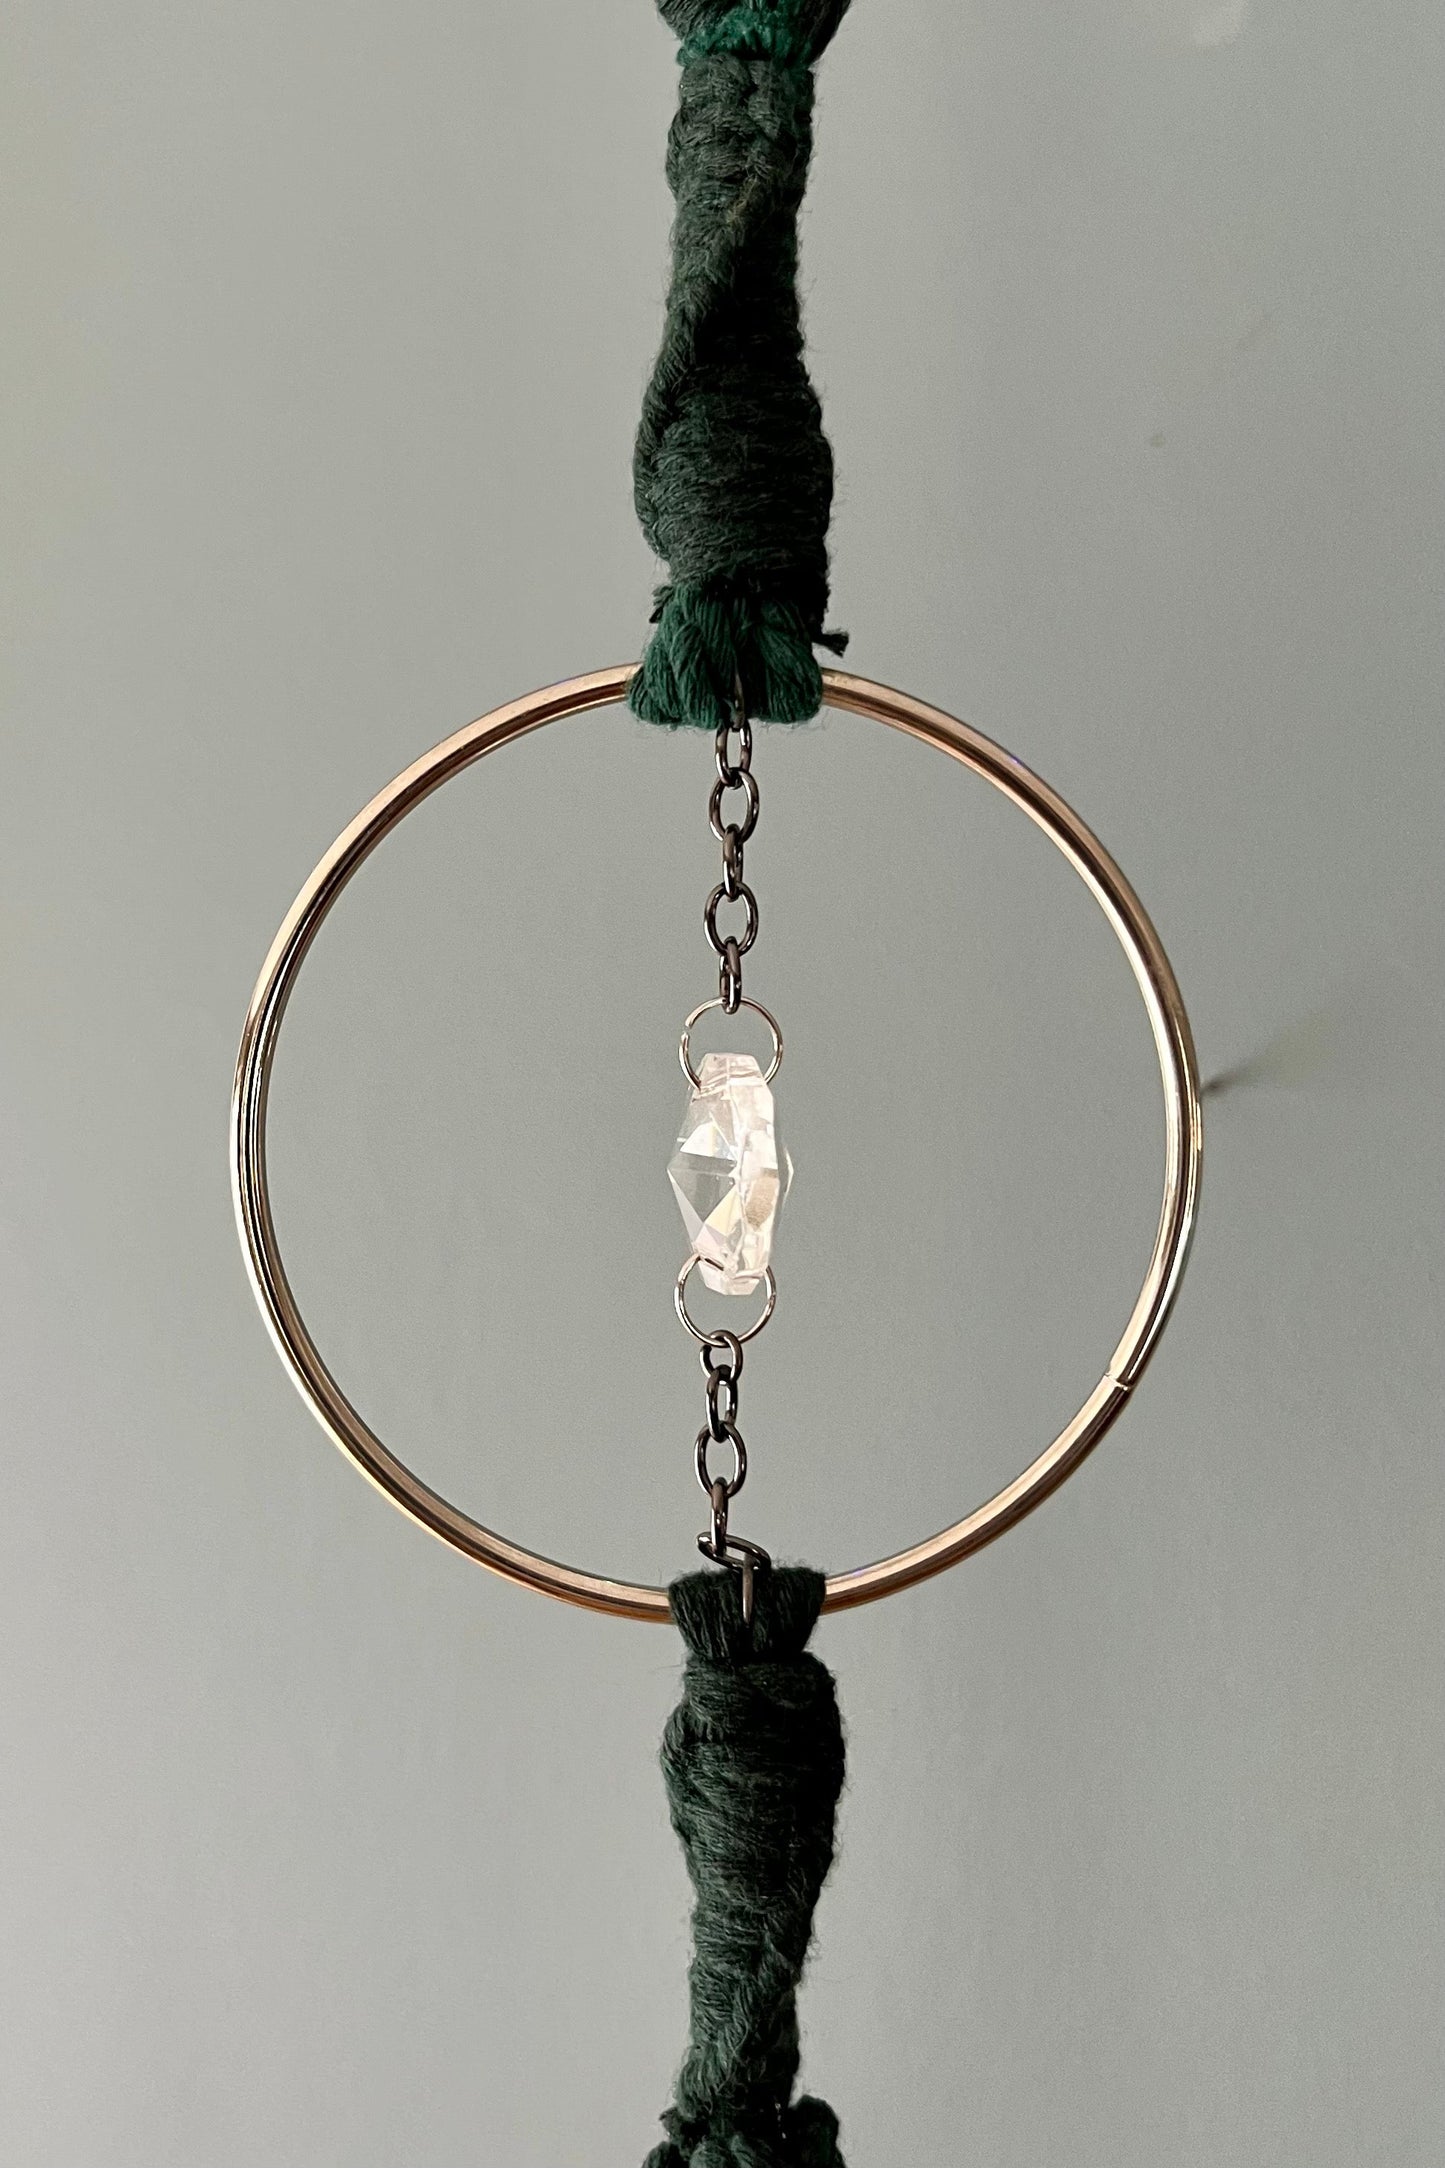 Apatite Crystal Hanger with Sun Catcher Decor from GemCadet